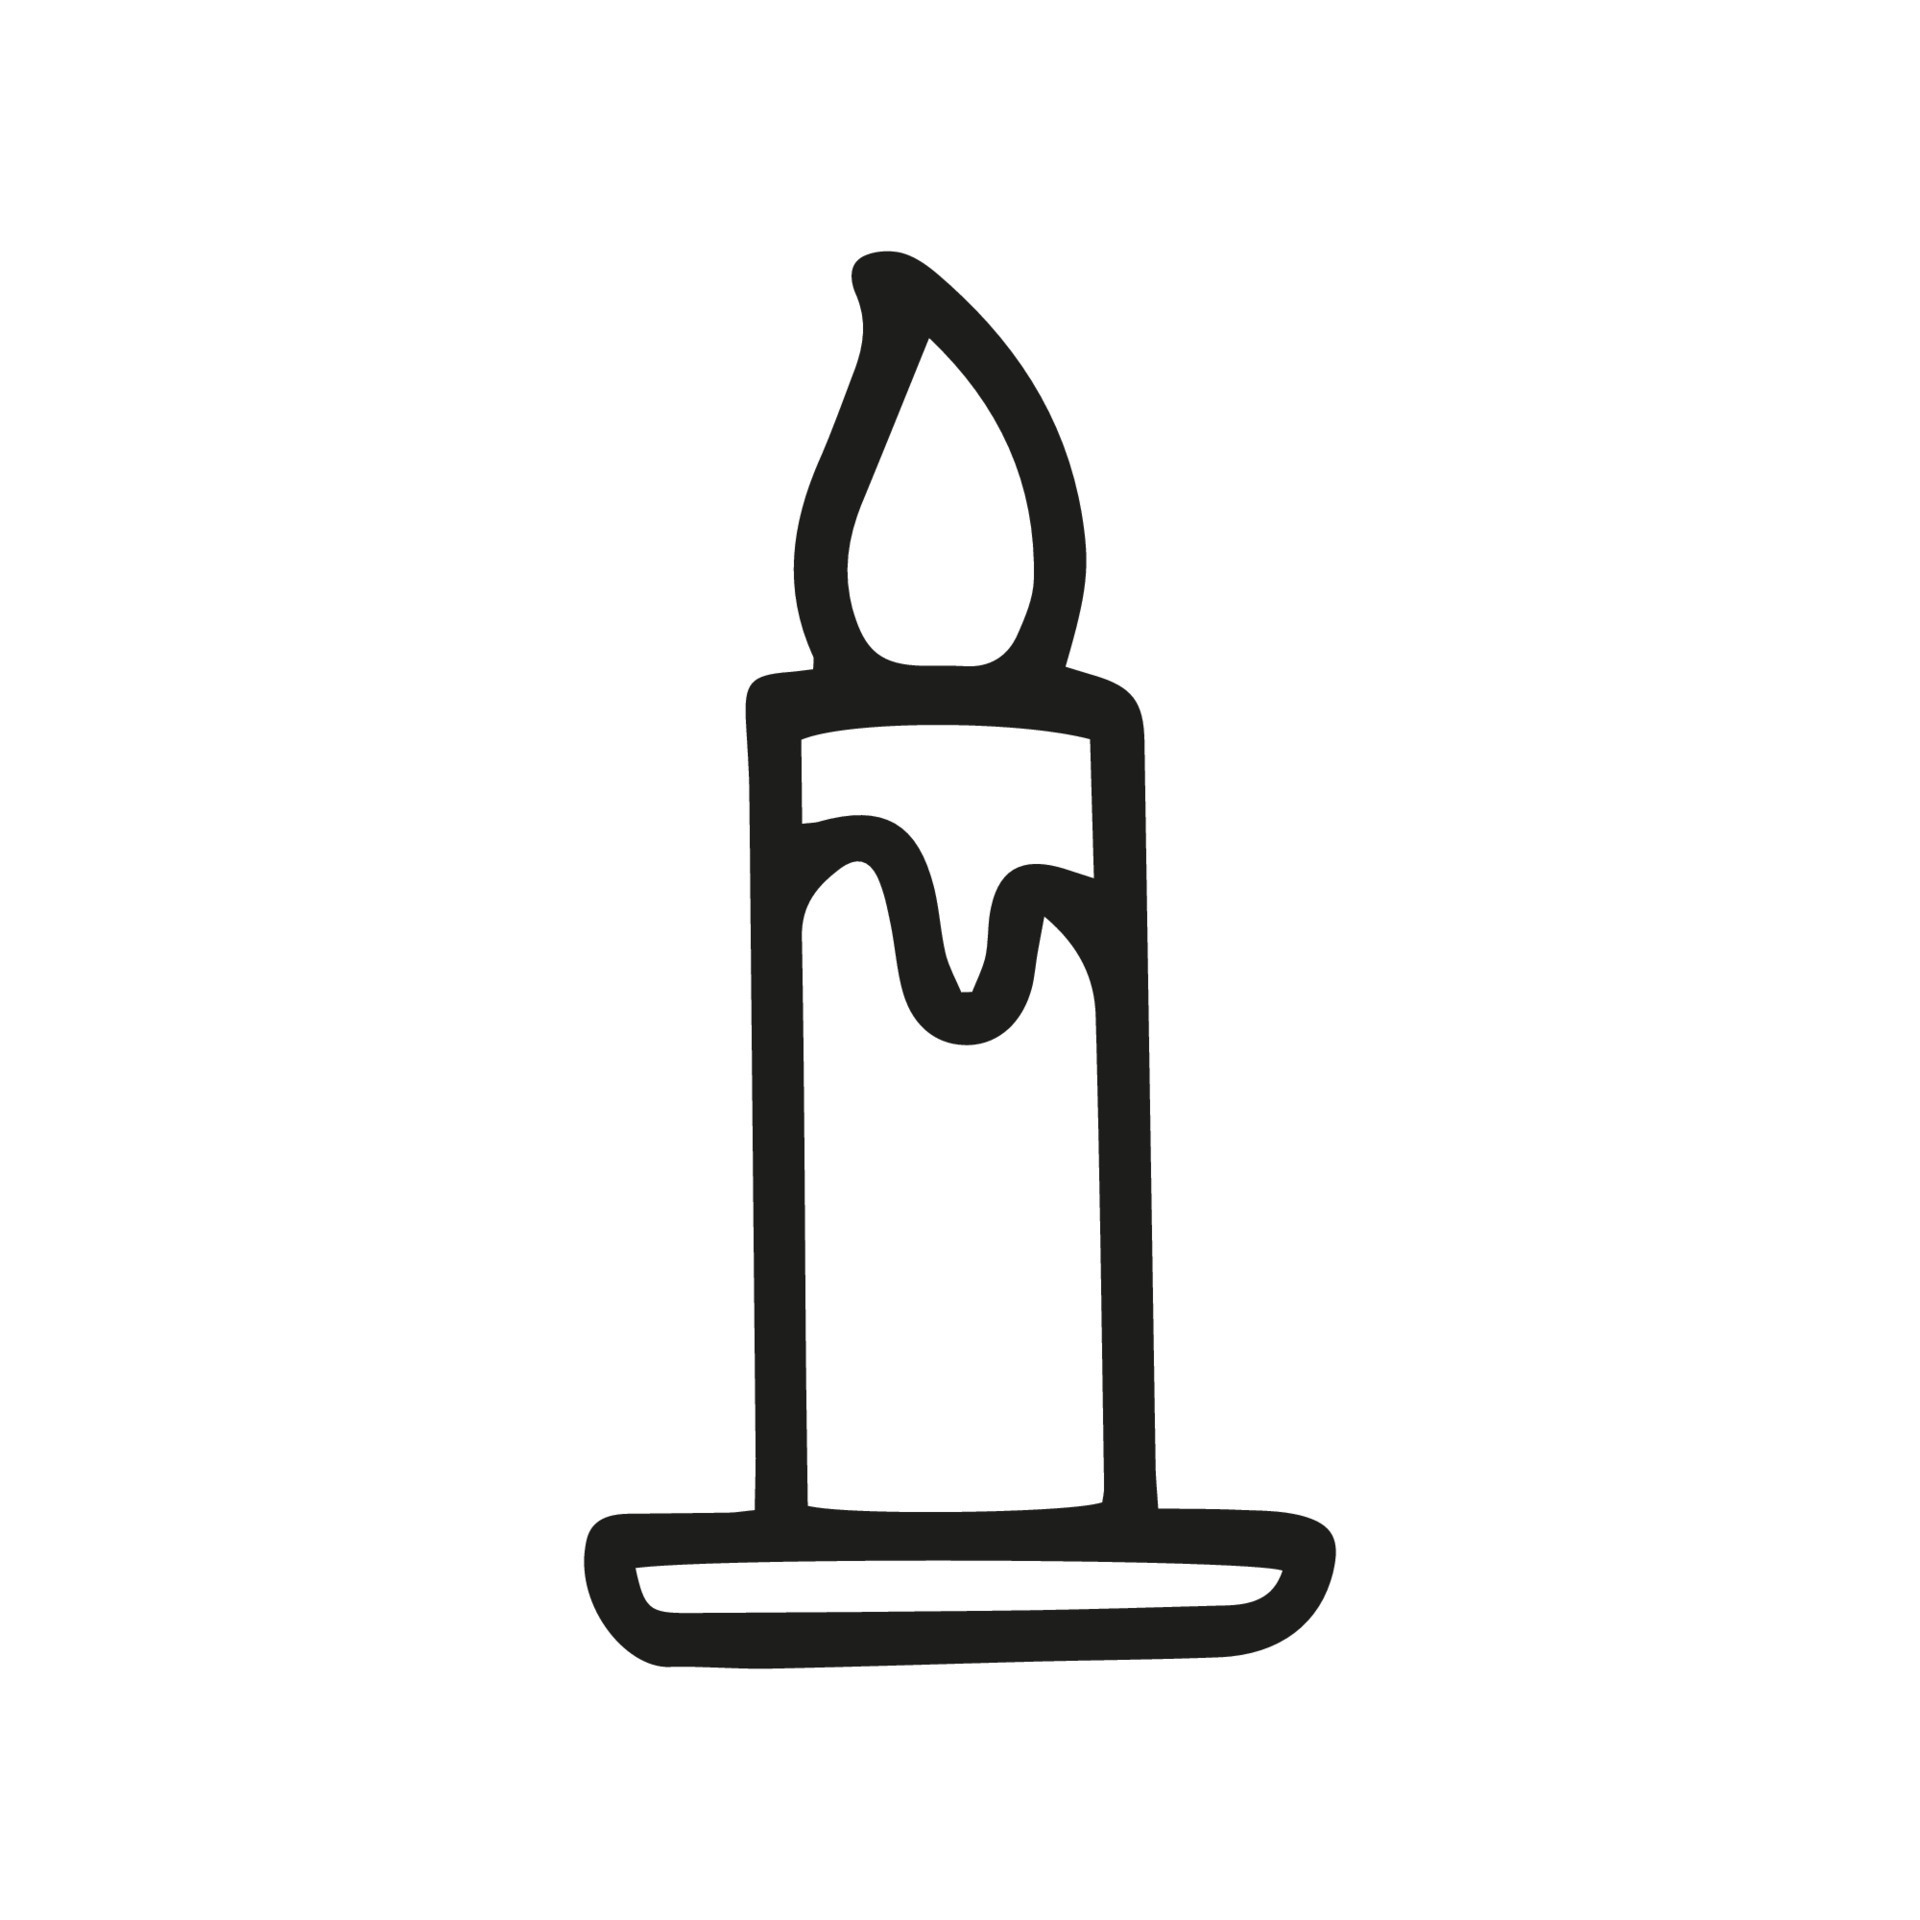 Ink sketch of burning candles Thick candles burning ink sketch isolated  on white background hand drawn vector illustration  CanStock